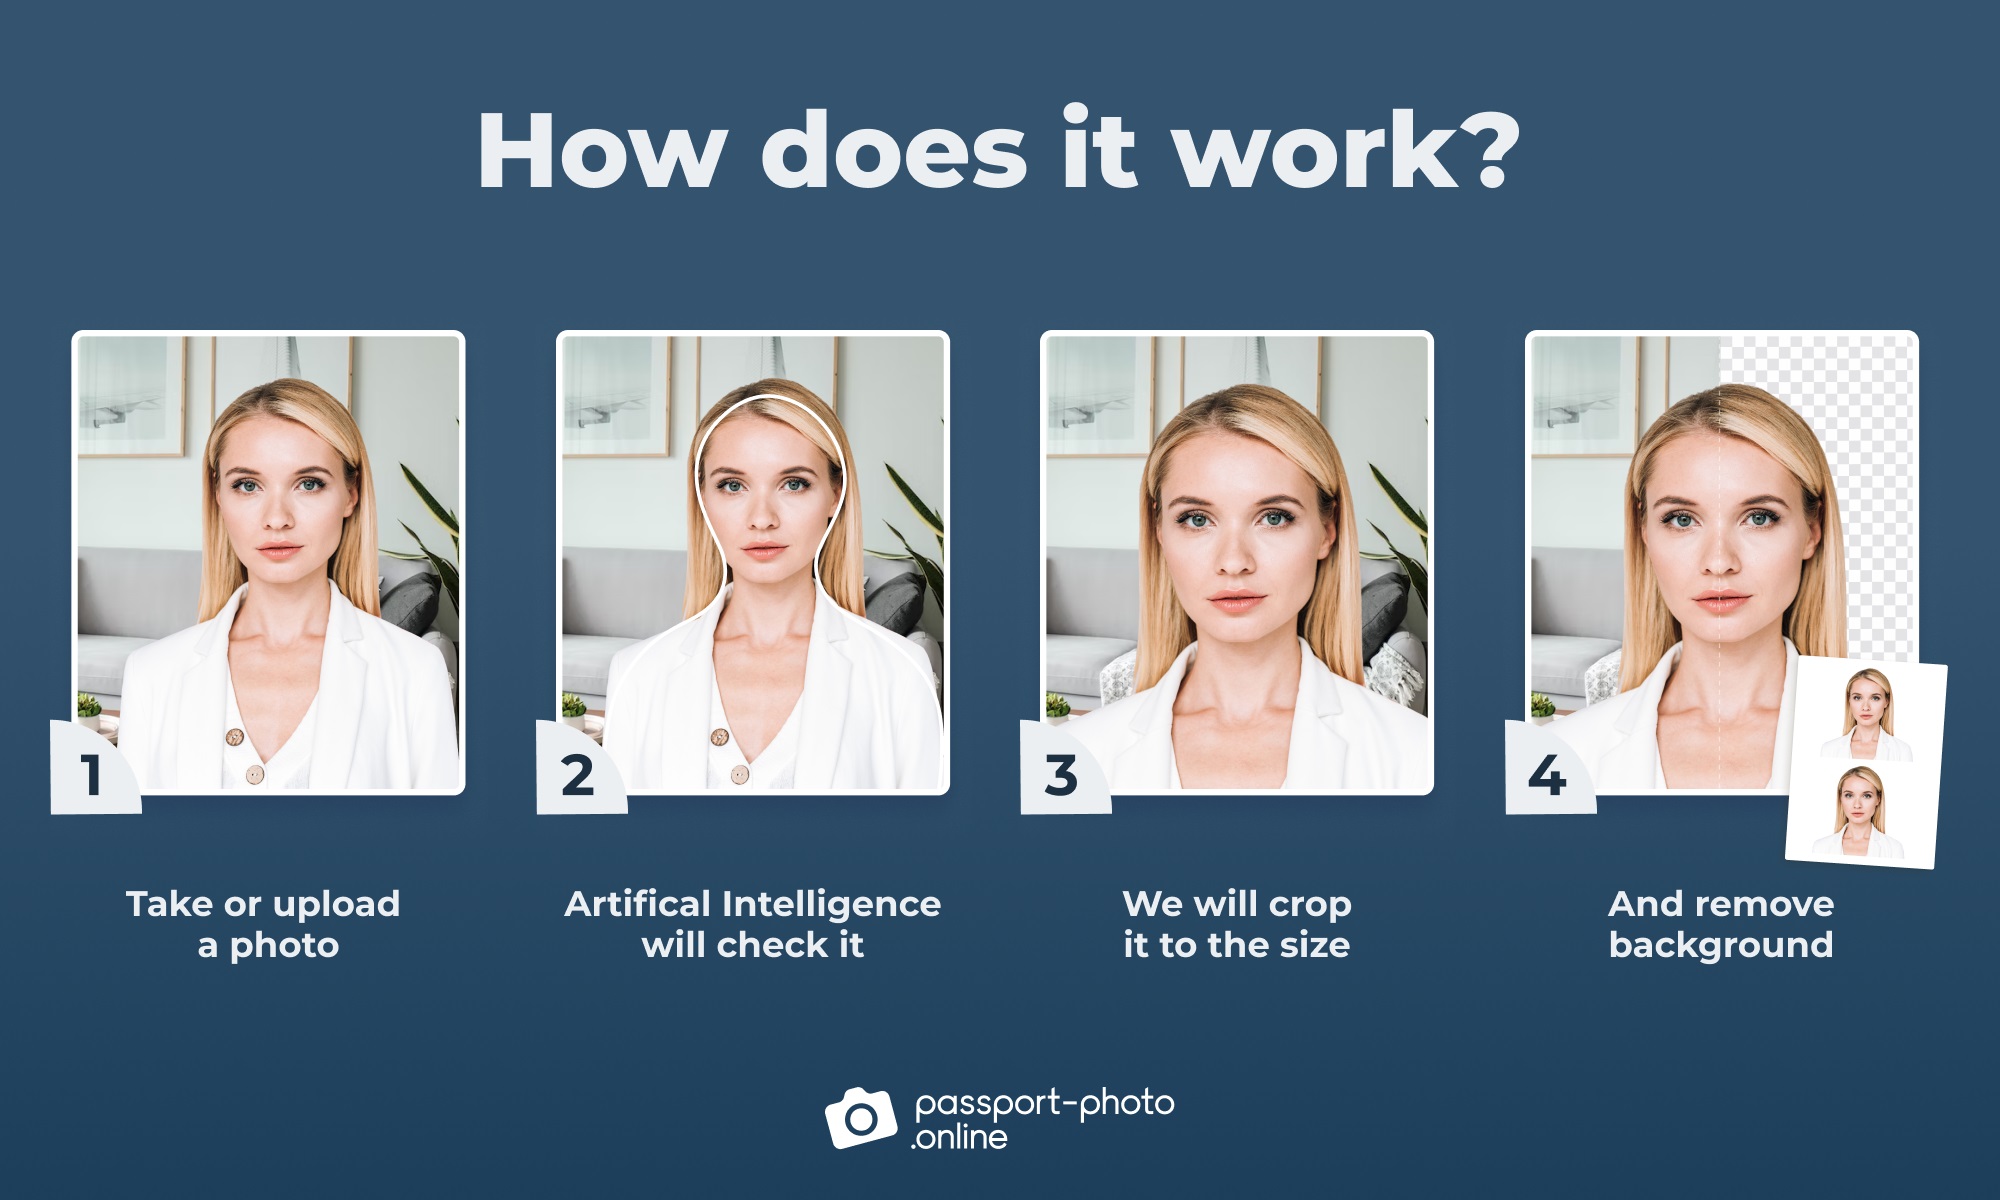 4 steps illustrating the creation of passport photos with Passport Photo Online.